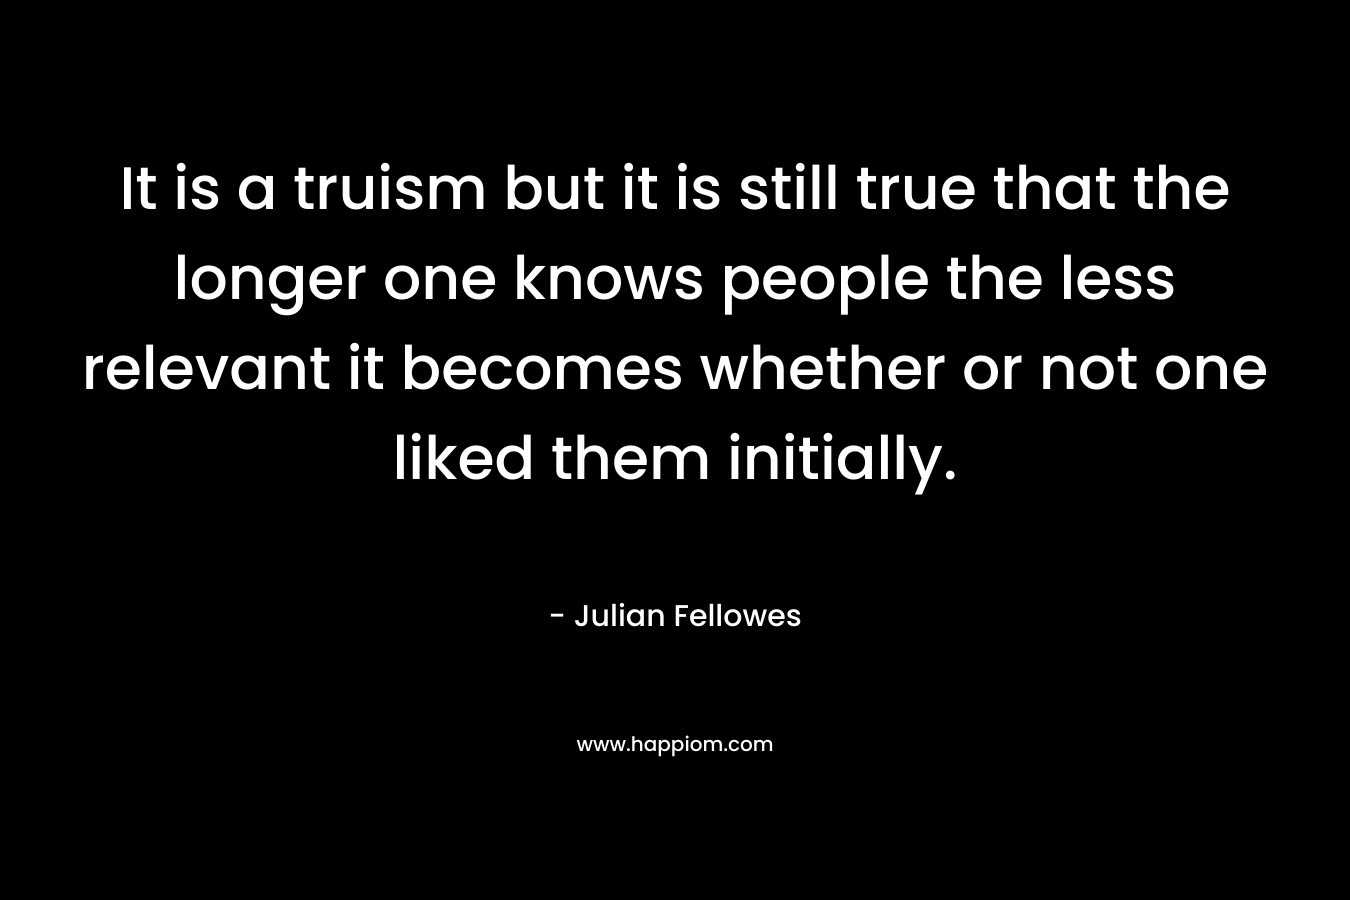 It is a truism but it is still true that the longer one knows people the less relevant it becomes whether or not one liked them initially.